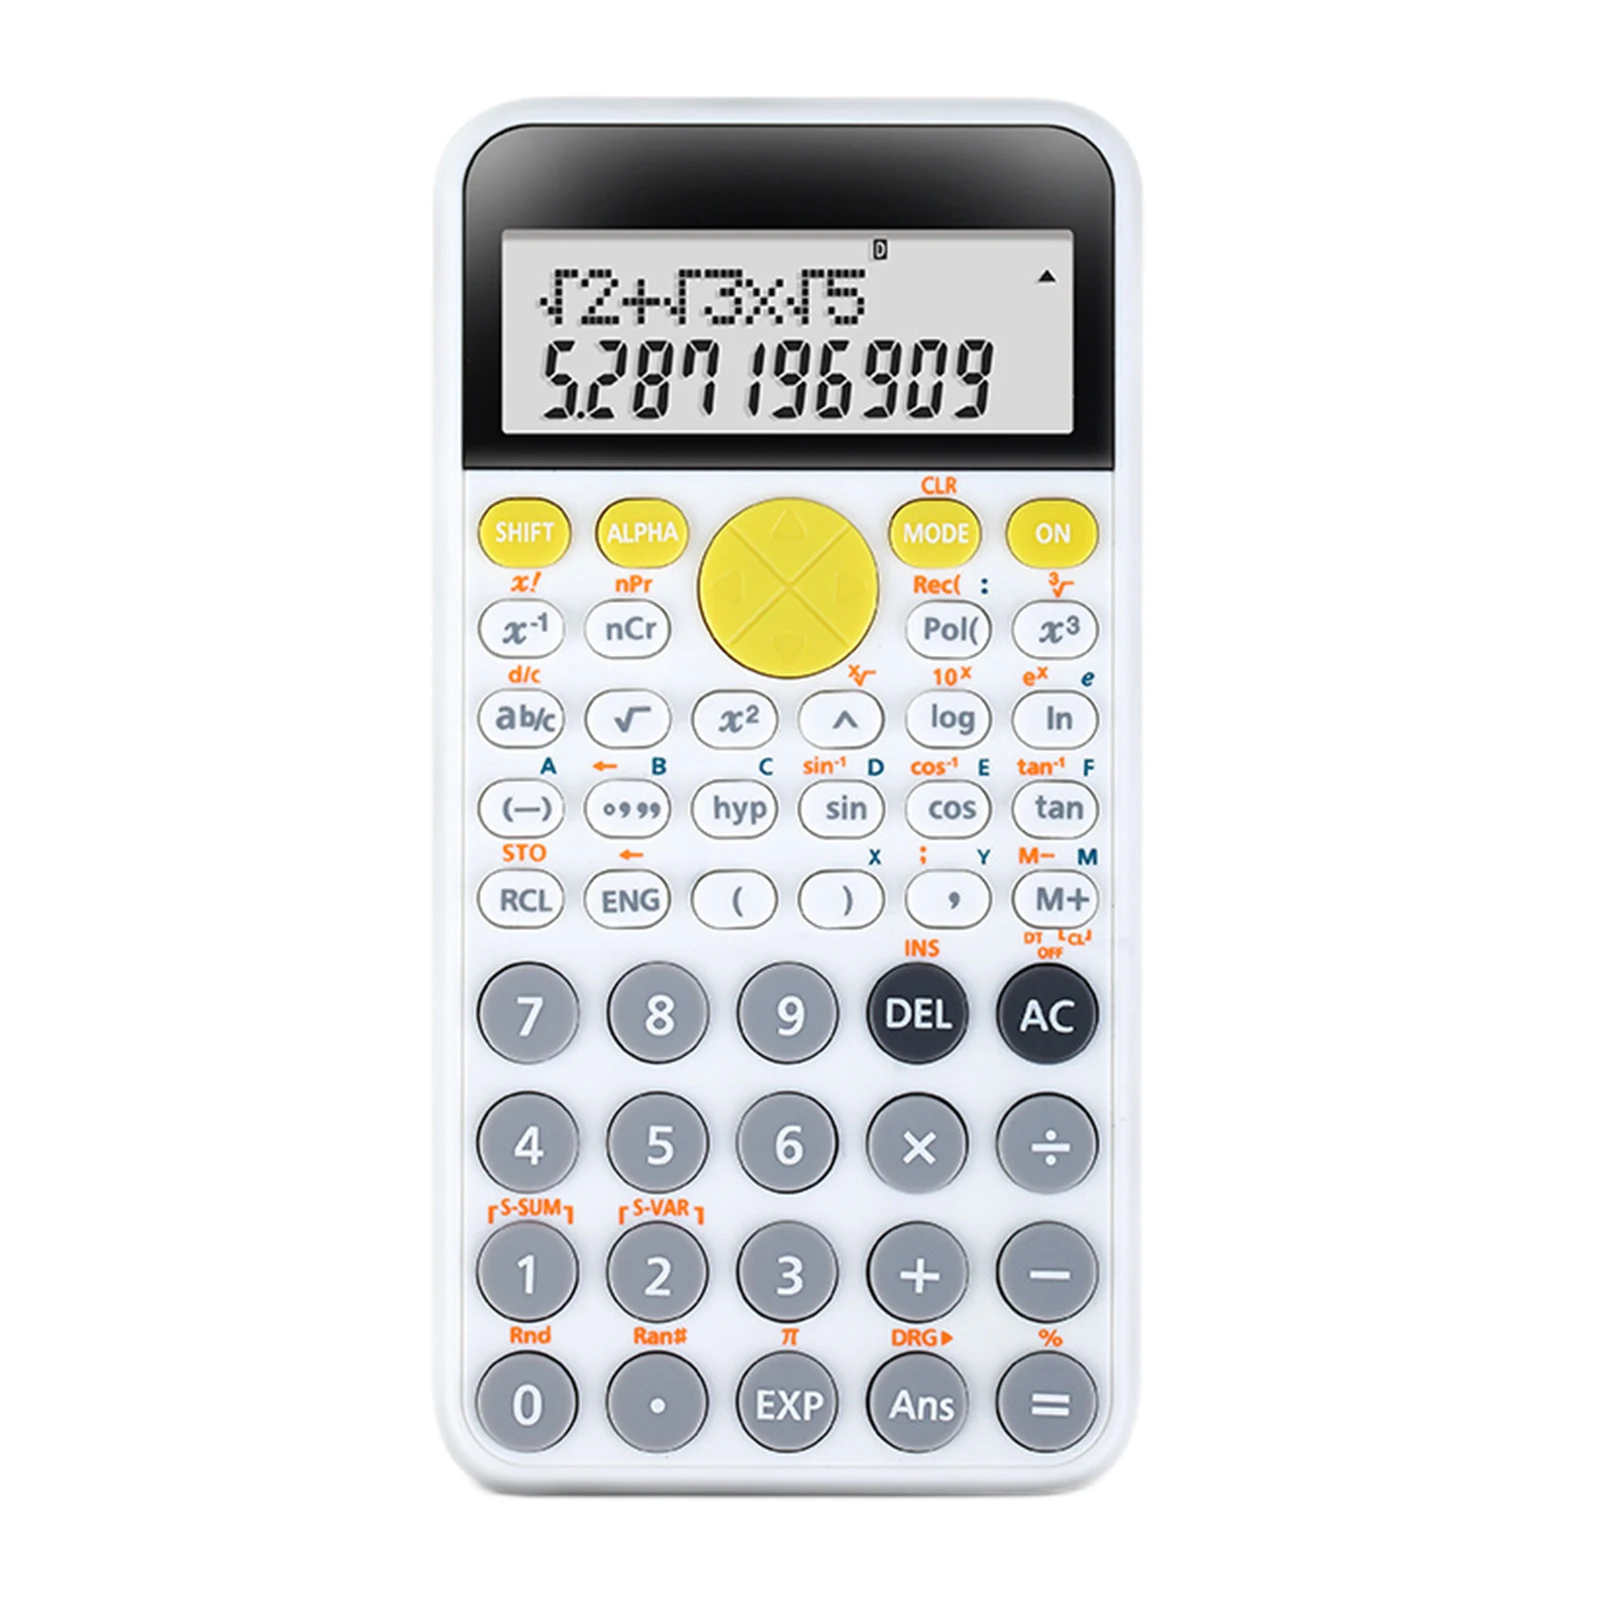 

Scientific Calculator Desk 4 Function Calculators For Junior High School Or College Students Perfect For Beginner And Advanced